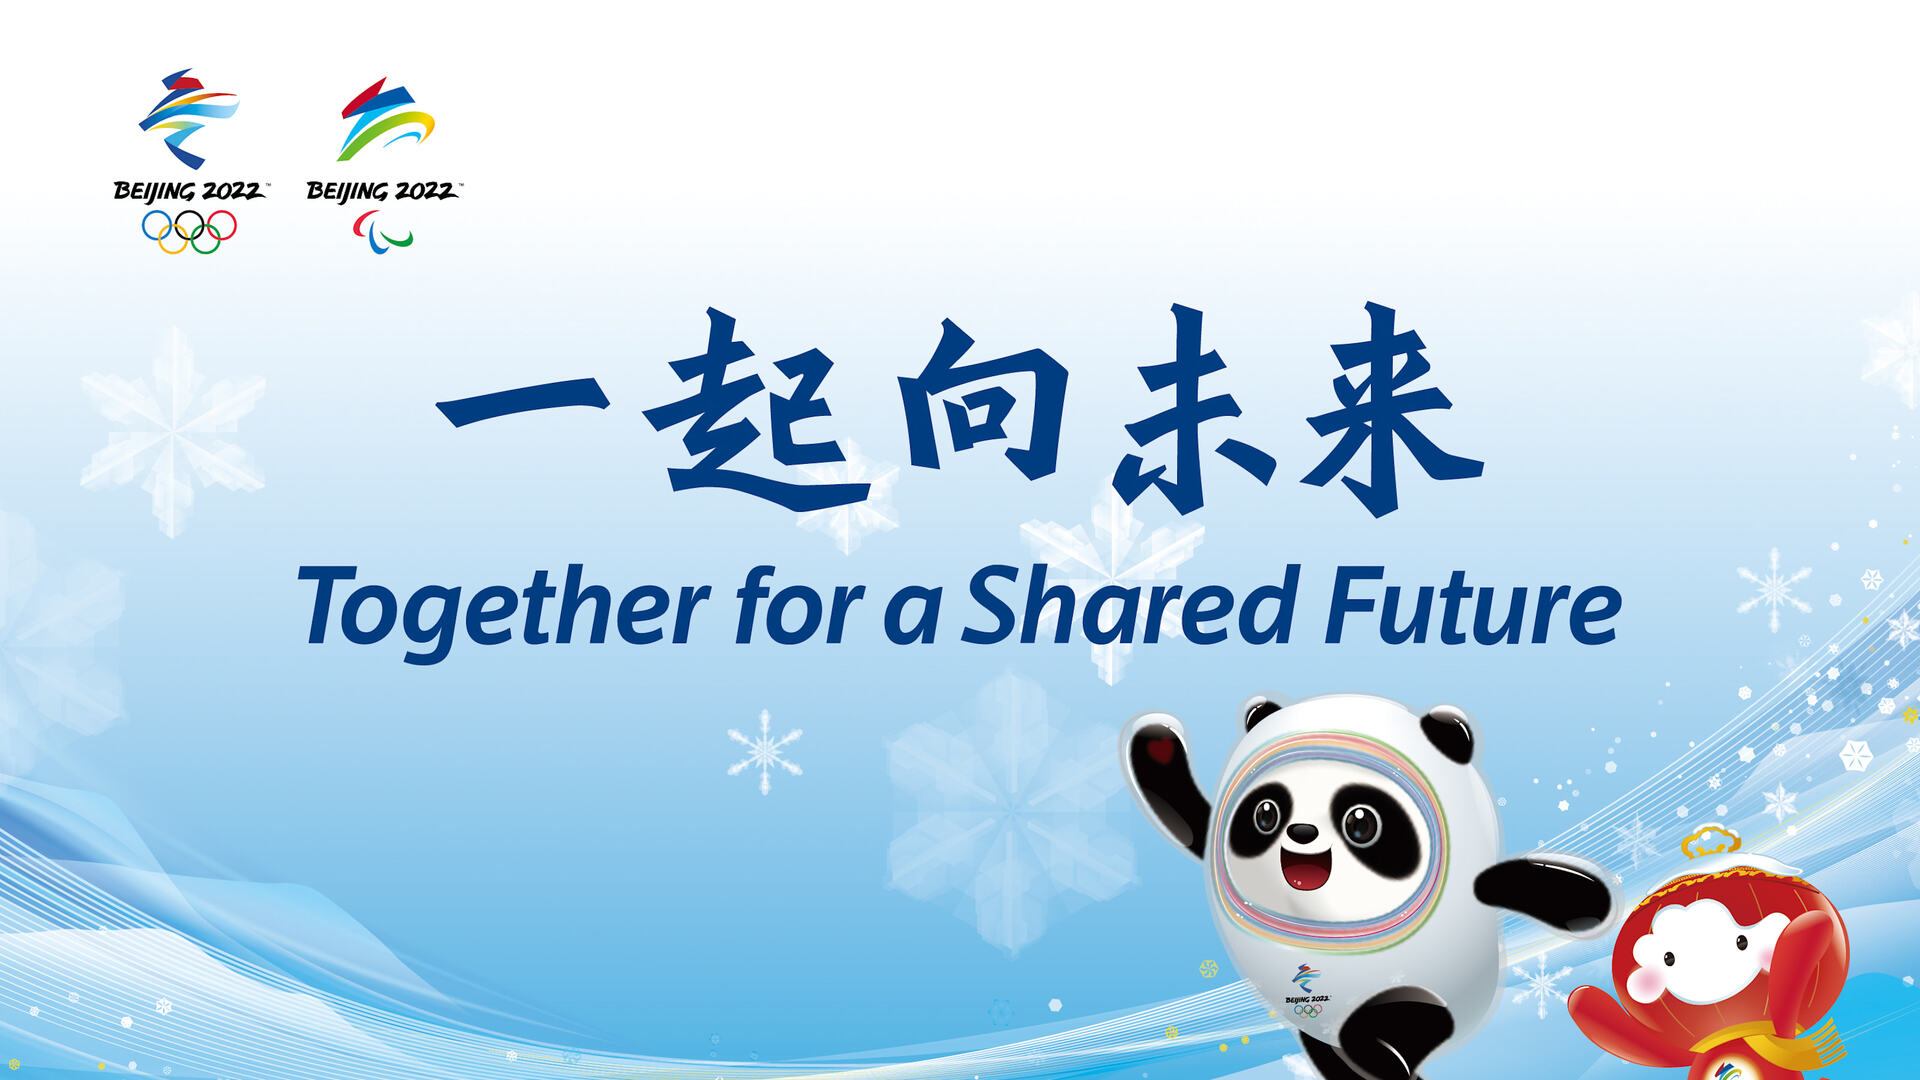 Together for a shared future!